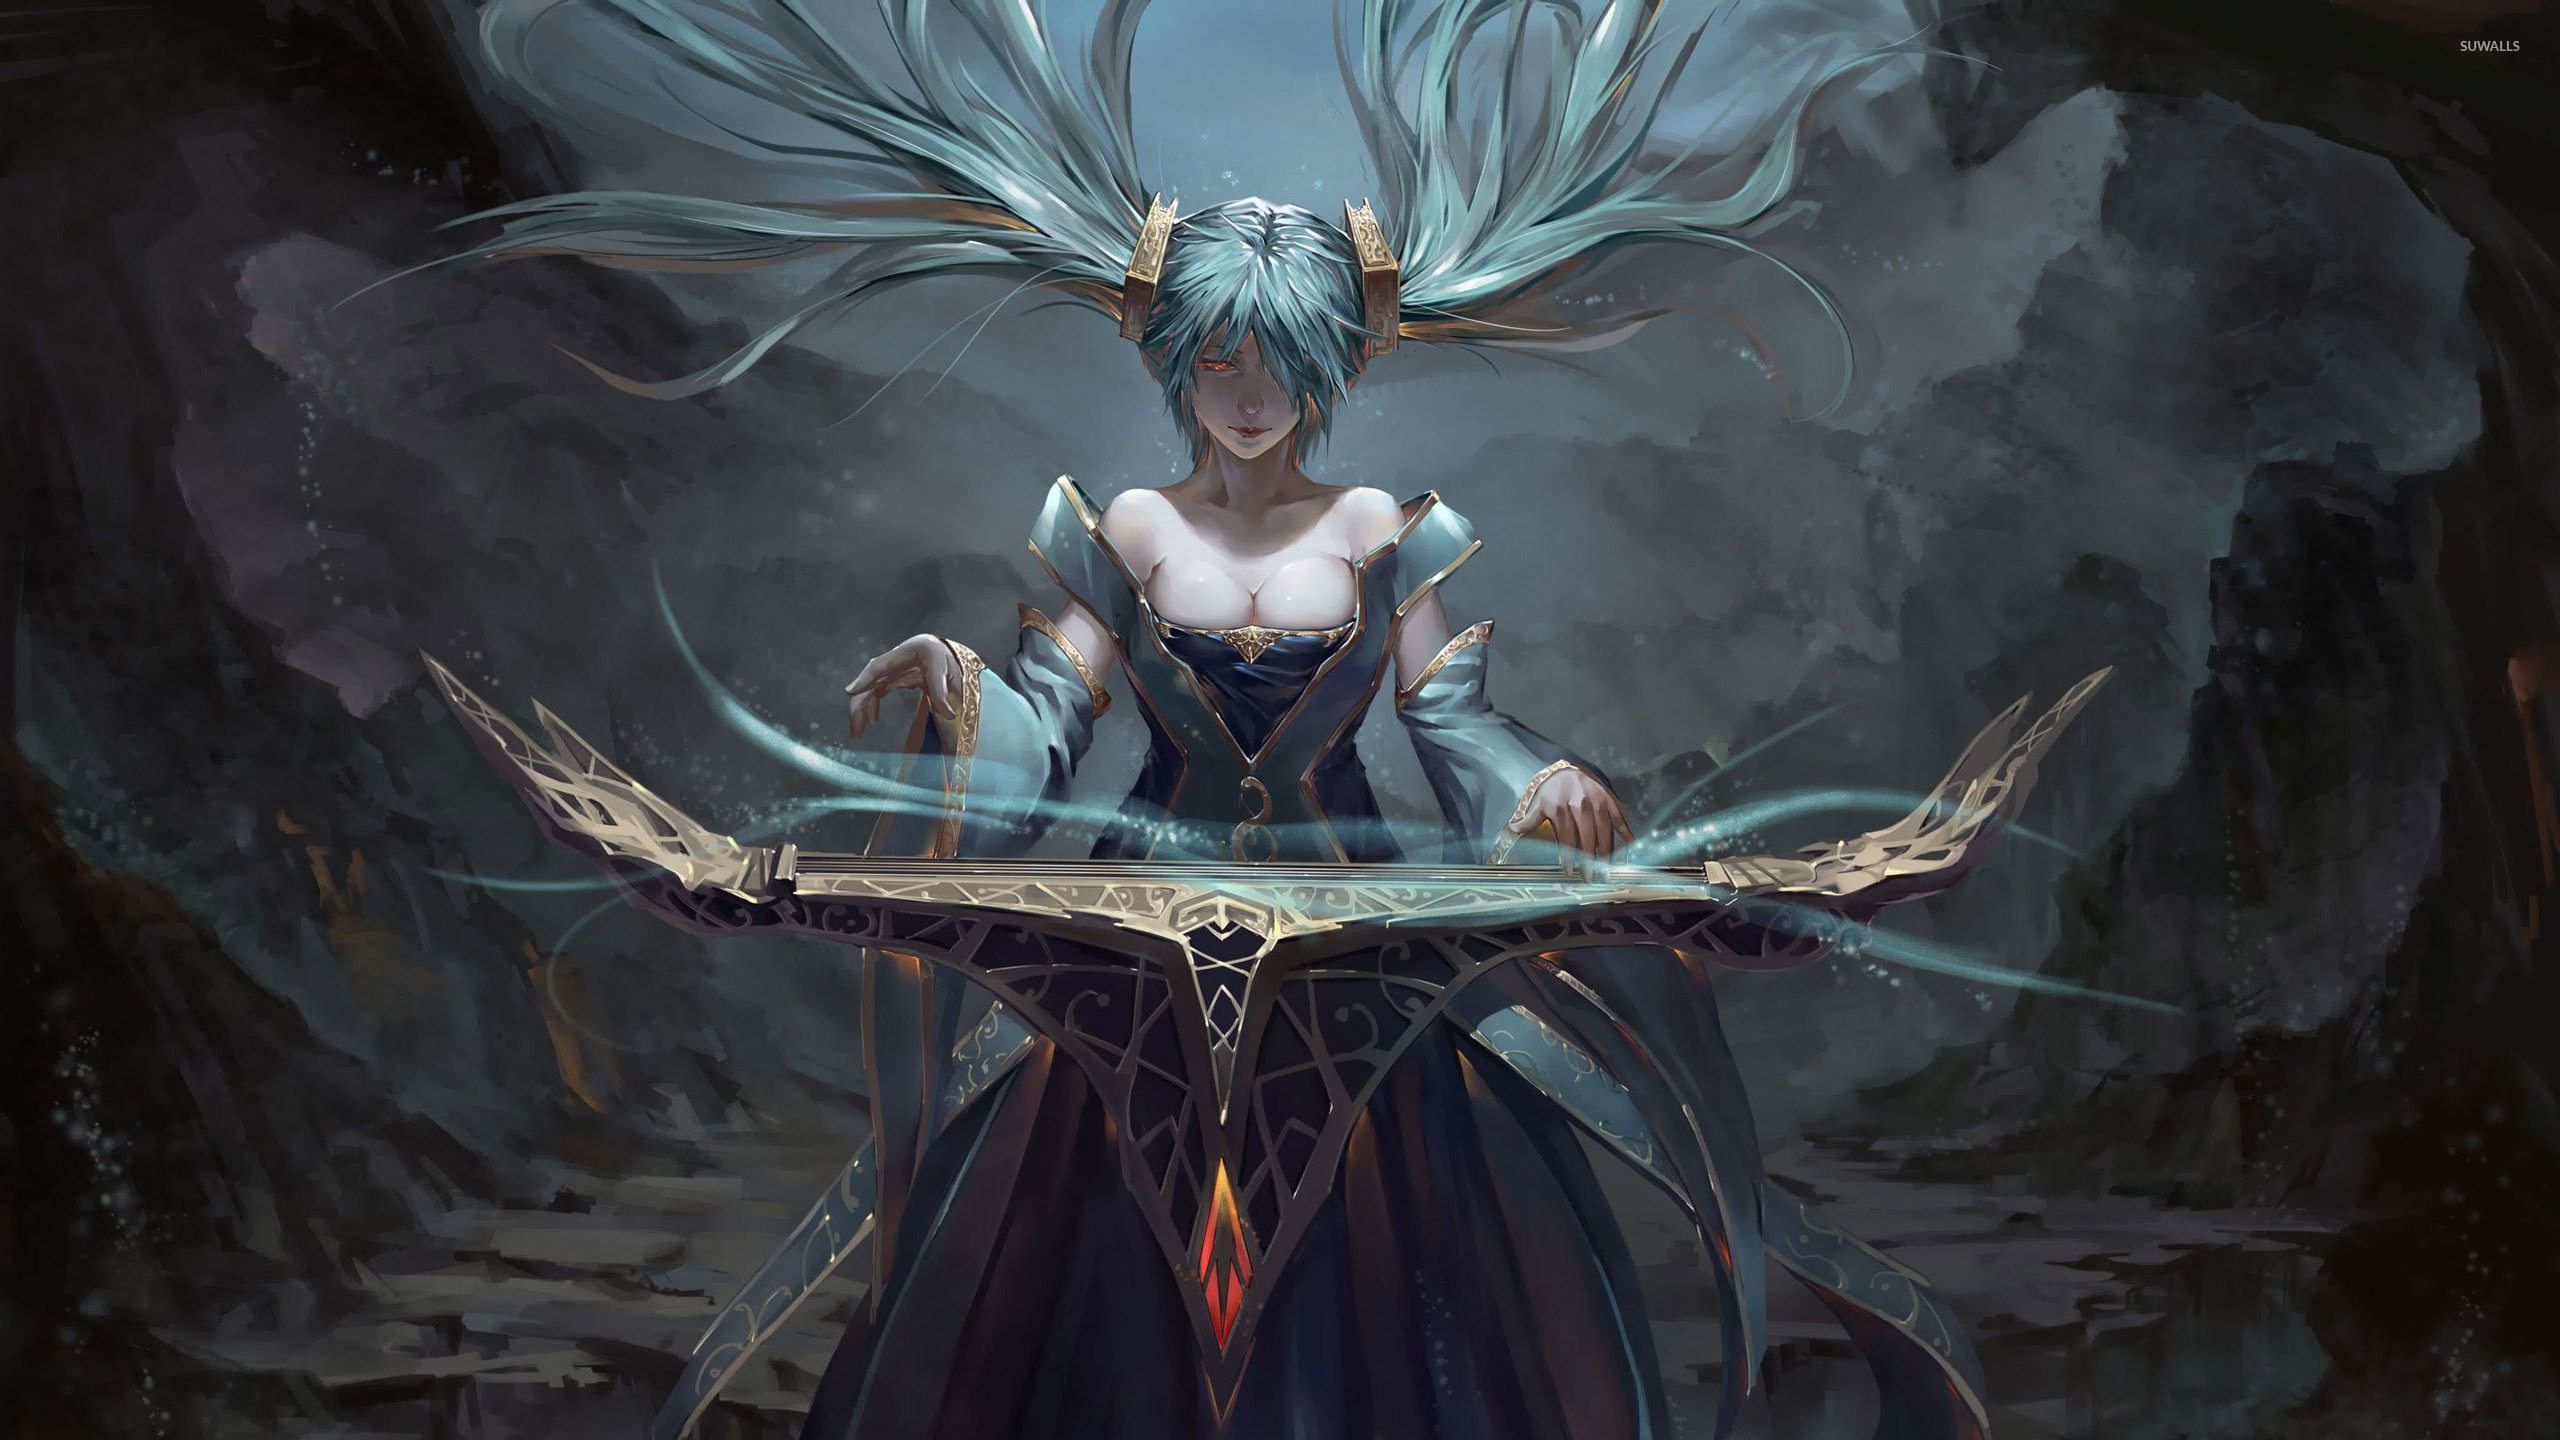 Sona - League of Legends wallpaper - Game wallpapers - #26626